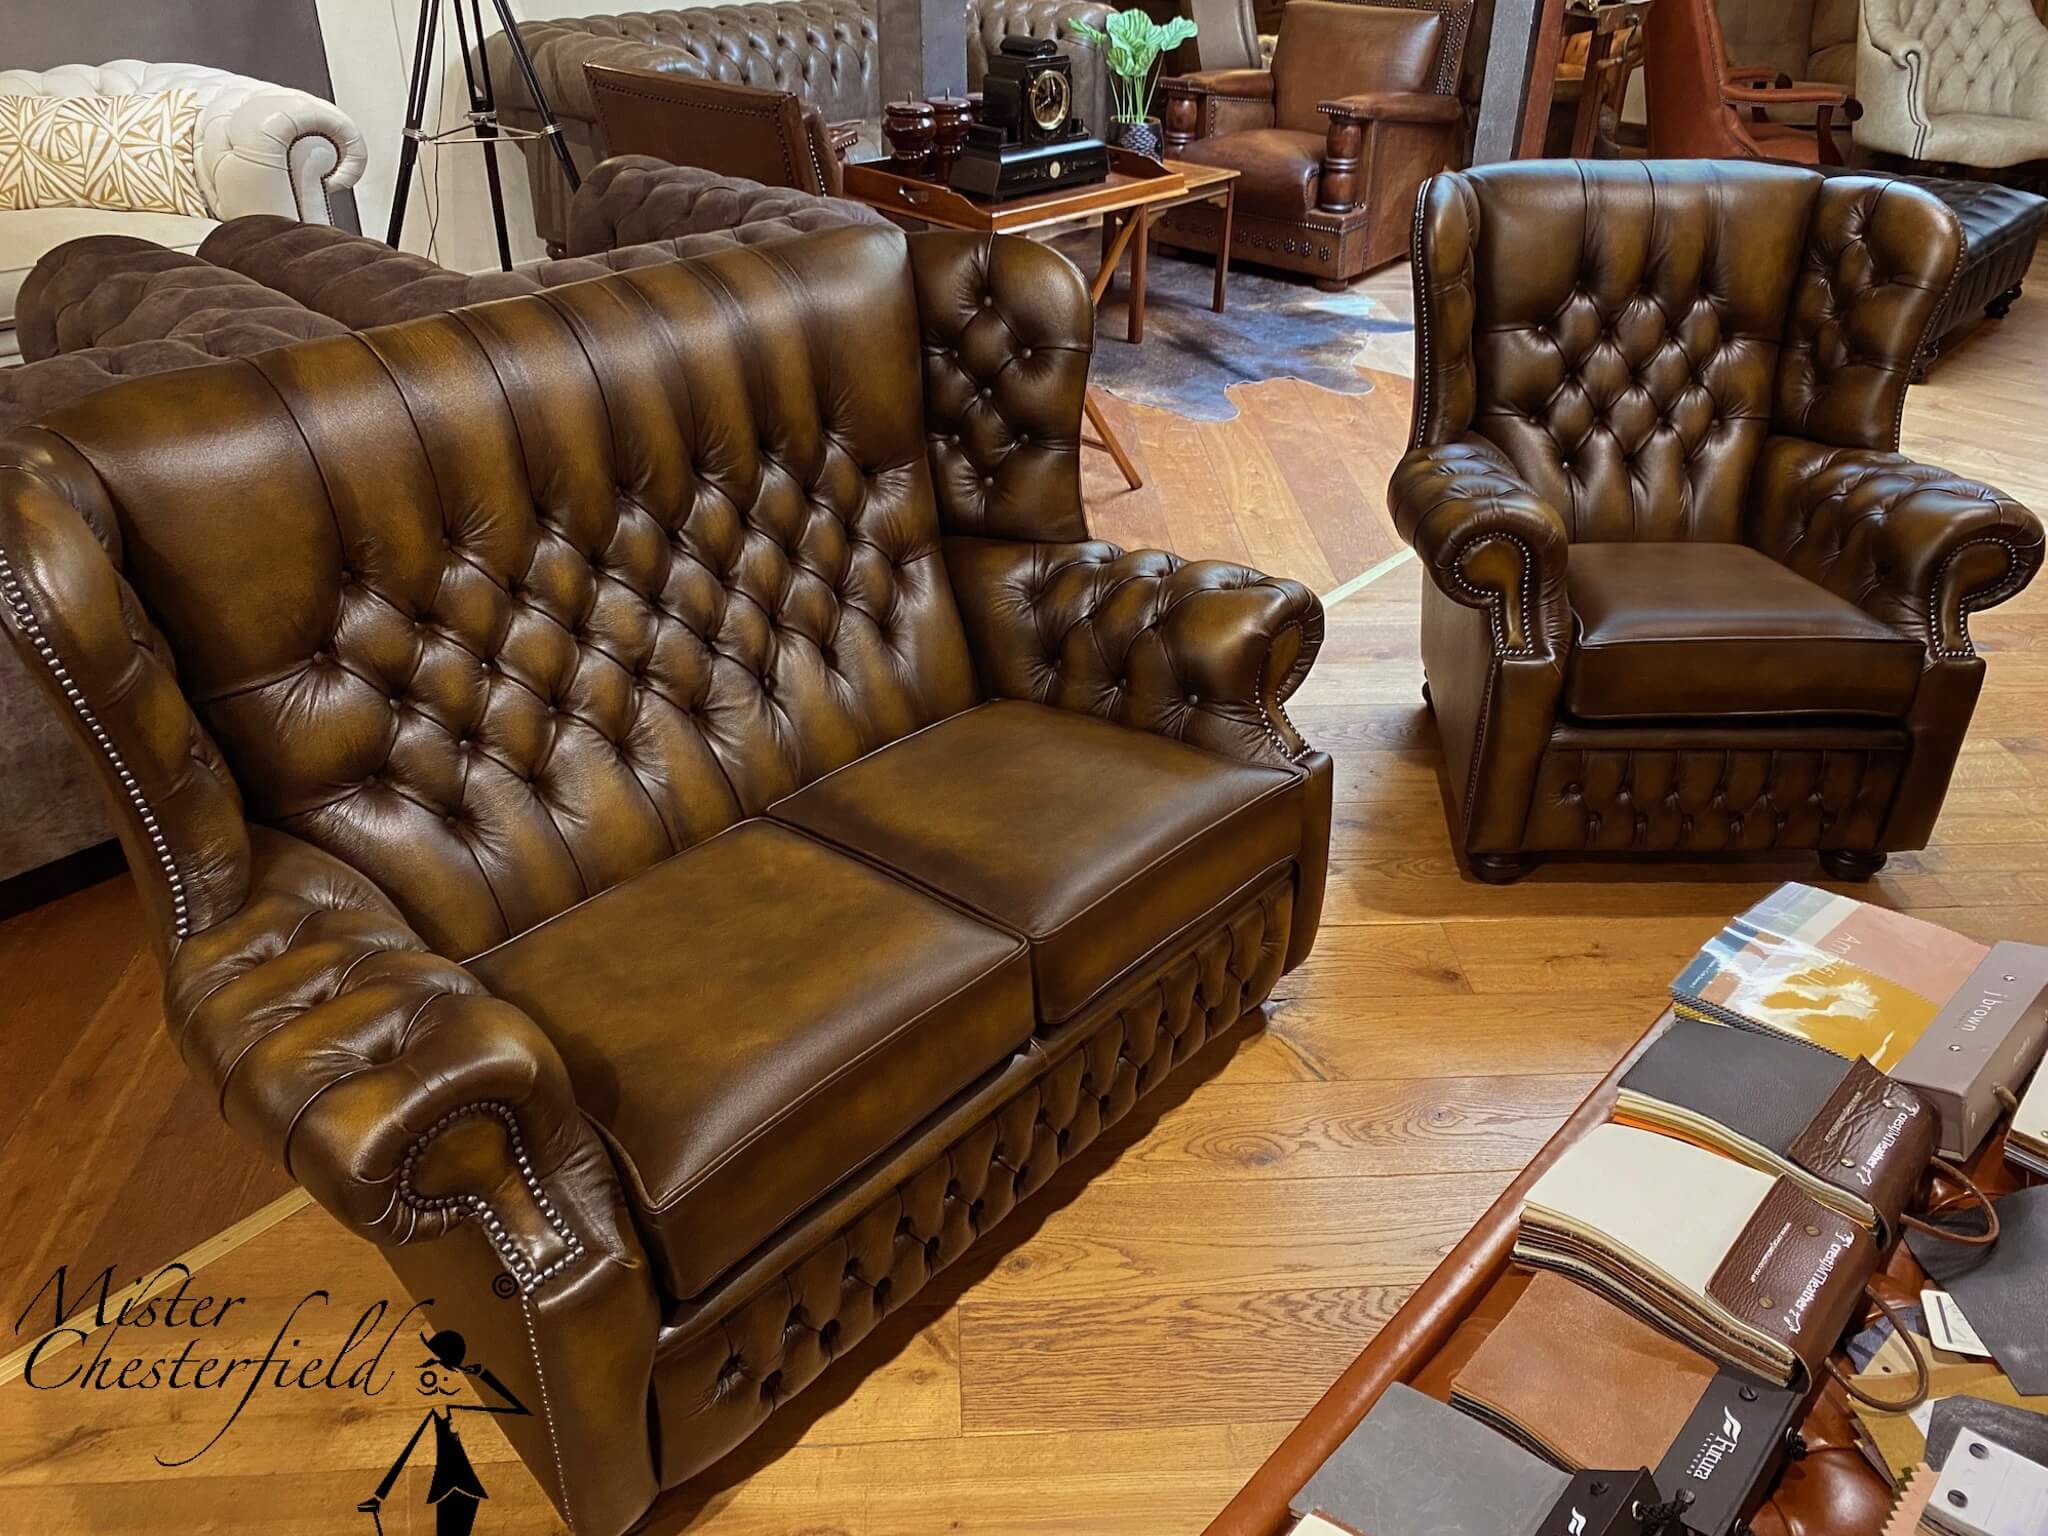 Showroom modèle chesterfield offre